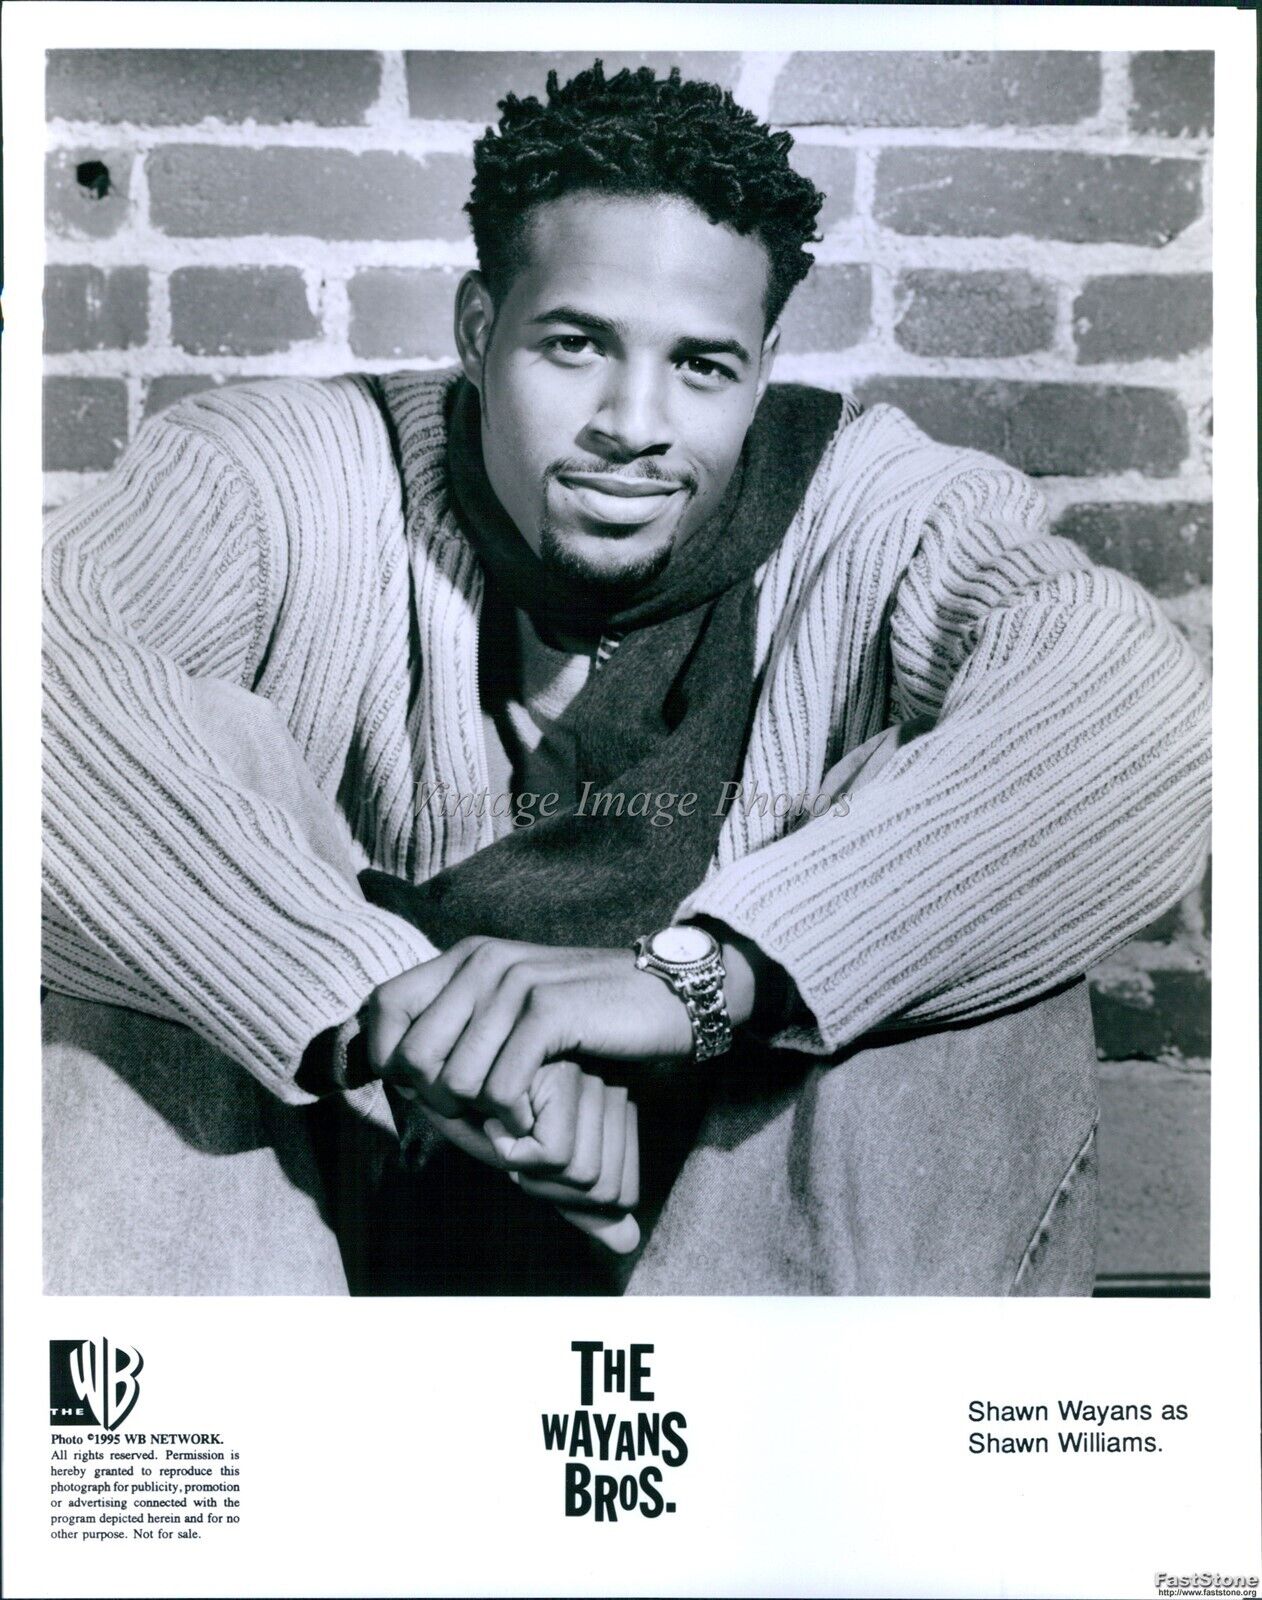 1995 Shawn Wayans As Shawn Williams On The Wayans Bros. Television Photo 8X10